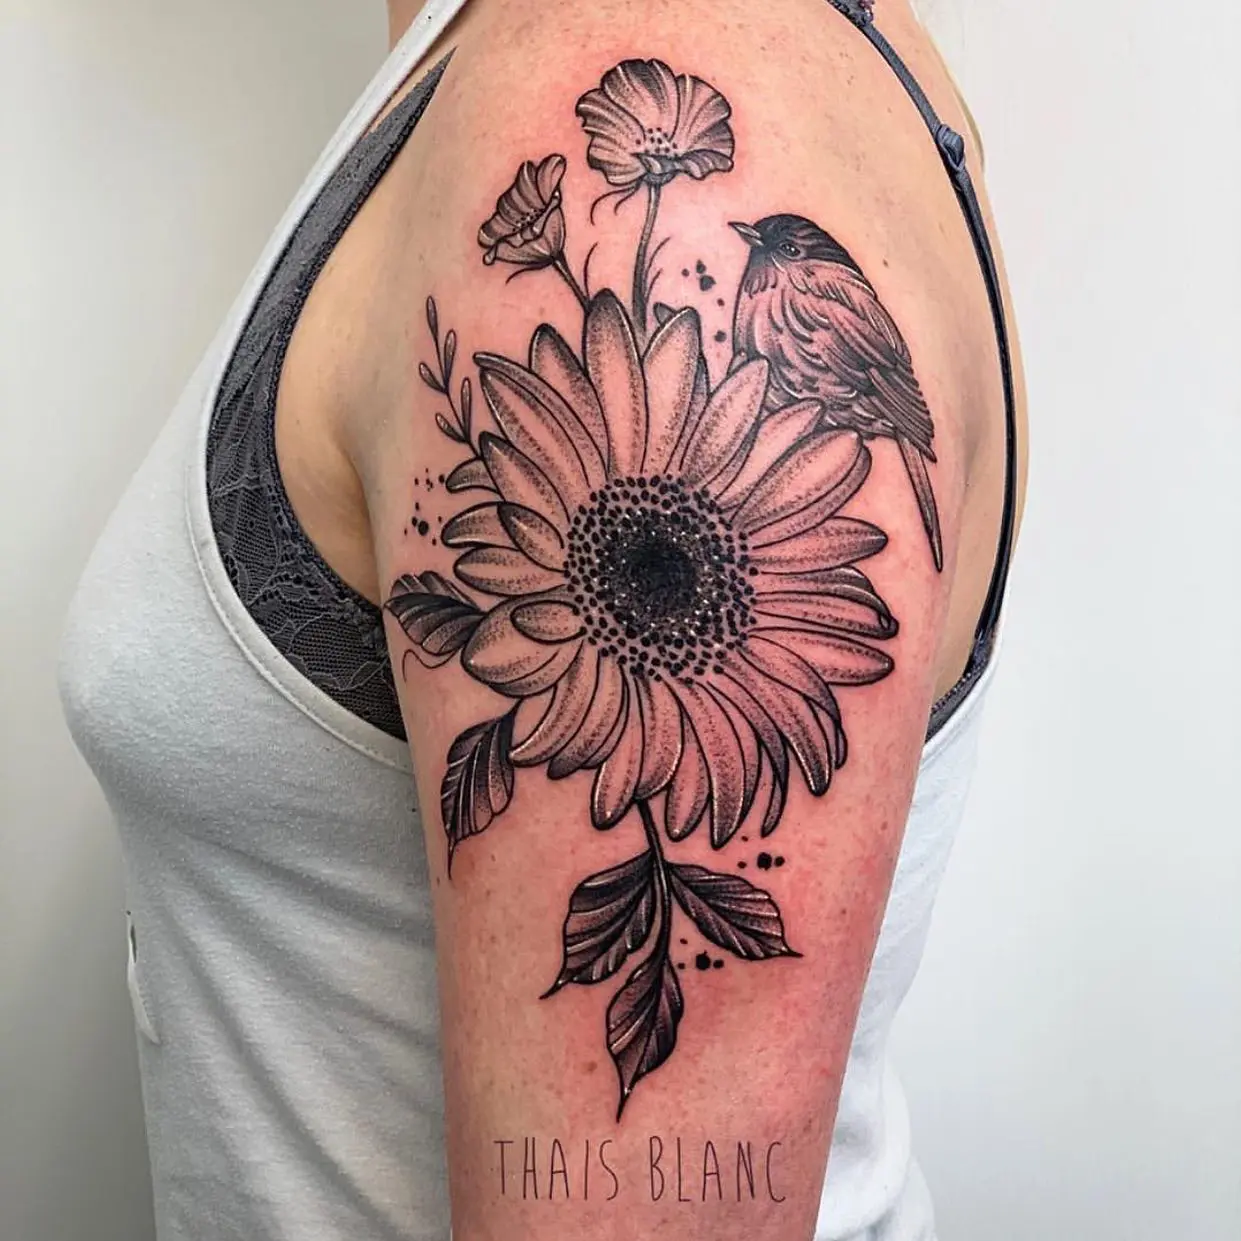 @thaisblanc is back and as busy as every with her beautiful florals! The shop has been so busy since we opened and we can’t thank everyone enough 🖤🖤
-
-
-
-

tttism tattooworkers edinburghtattoo TAOT illustrativetattoo dotwork linetattoo darkartists blacktattooart blxckink btattooing uktta skinartmag ladytattooers studioxiii txttooing blackclaw inkstinct theblackmasters onlythedarkest blkttt waverlycolorco  blackworkerssubmission inkstinctsubmission tattoodo blacktattoomag @artof_black @blackclaw @blackworkershero @inkedmag @uktta @ninemag @theartoftattoos